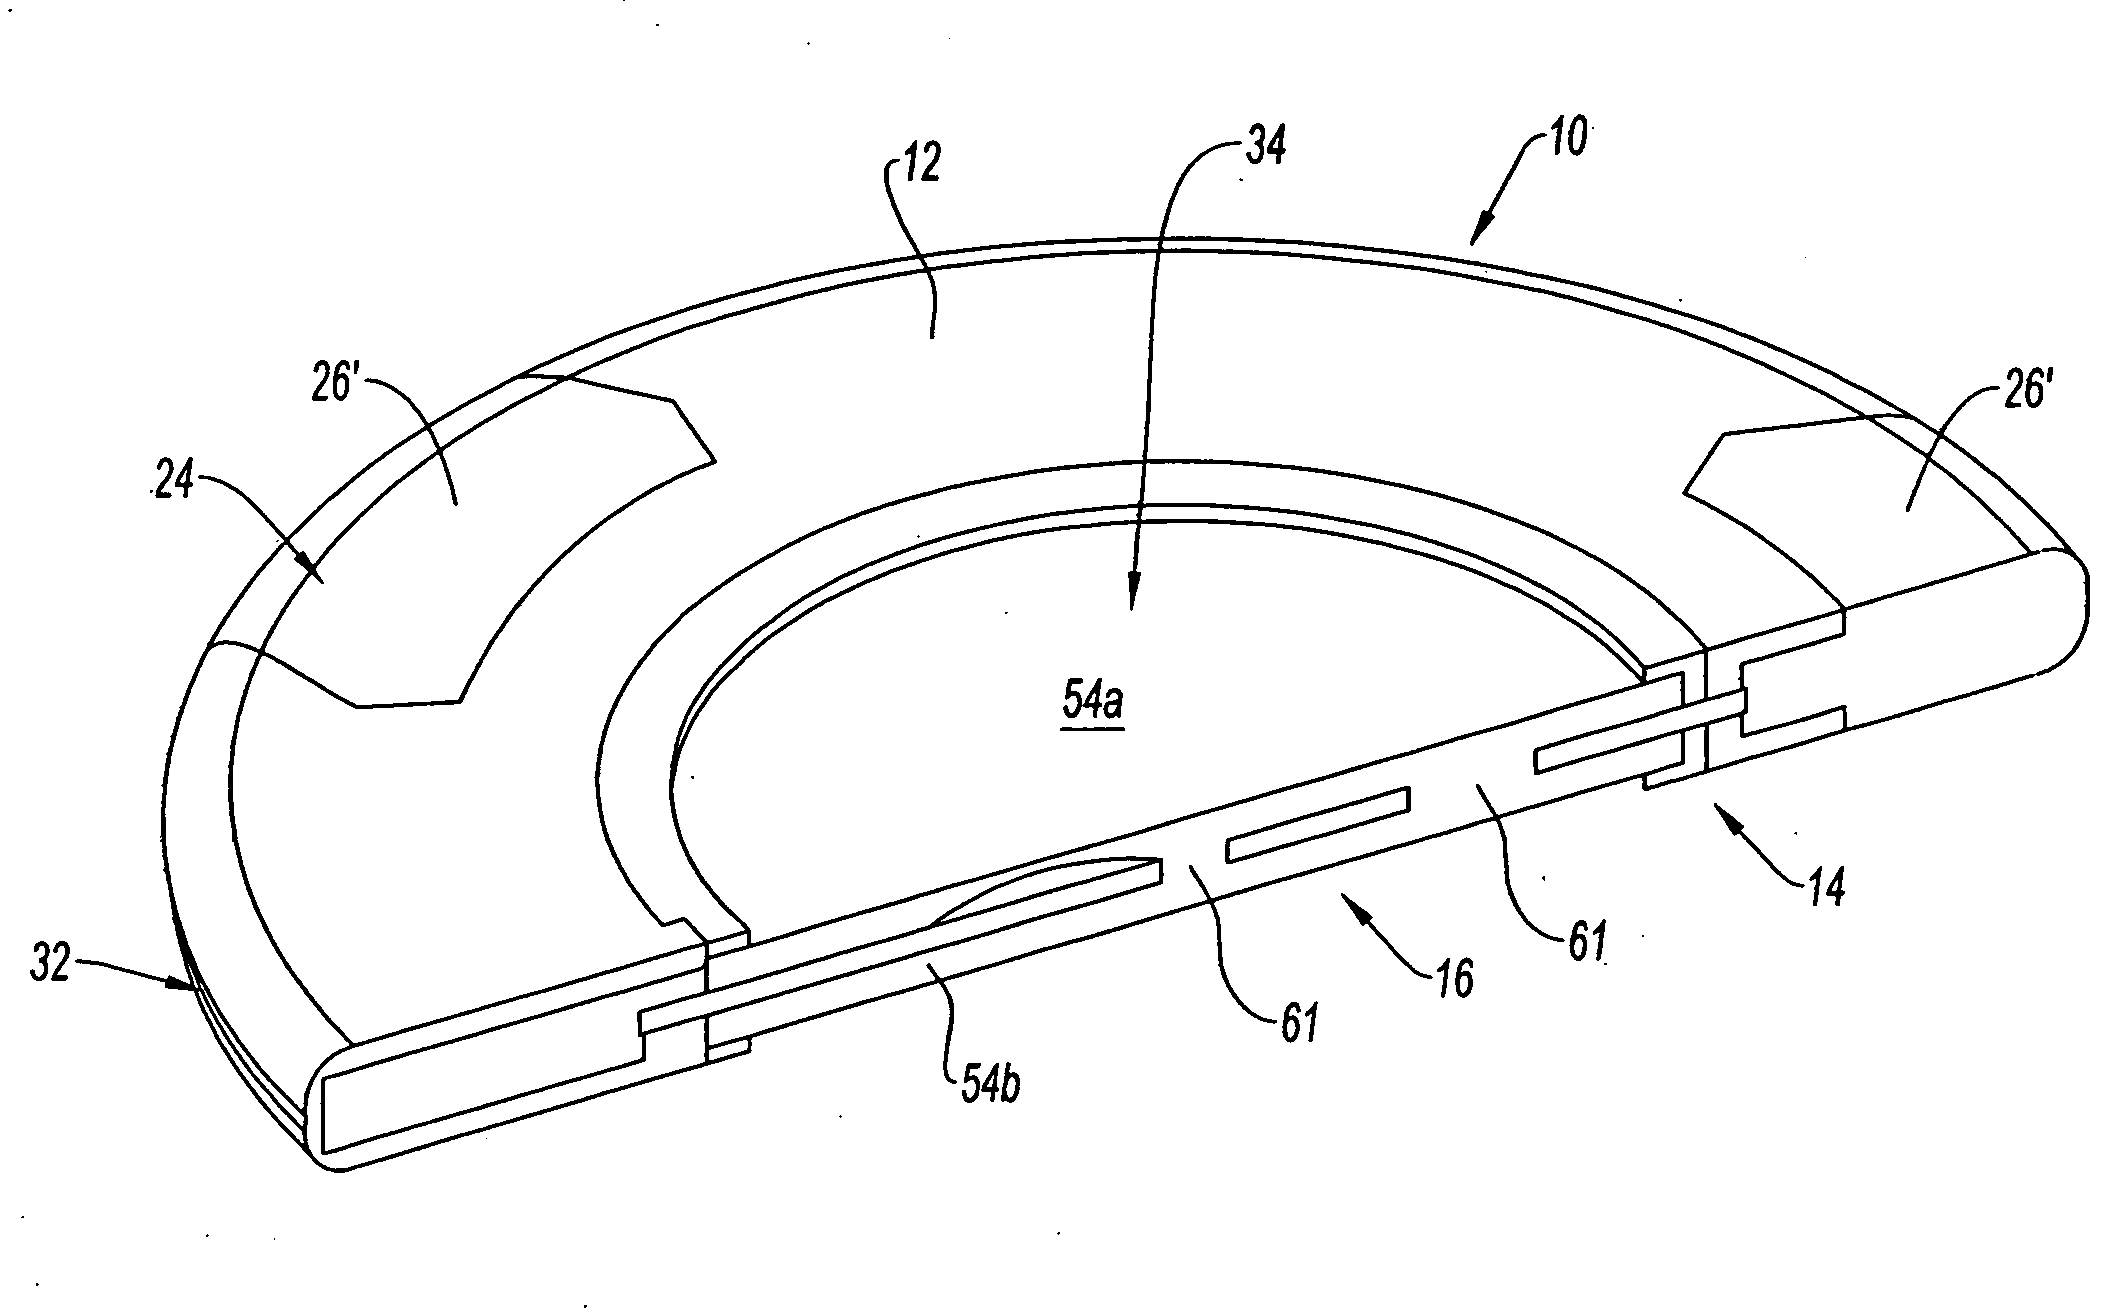 Token With Electronic Device, Method of Making Thereof, and Apparatus for Making Thereof